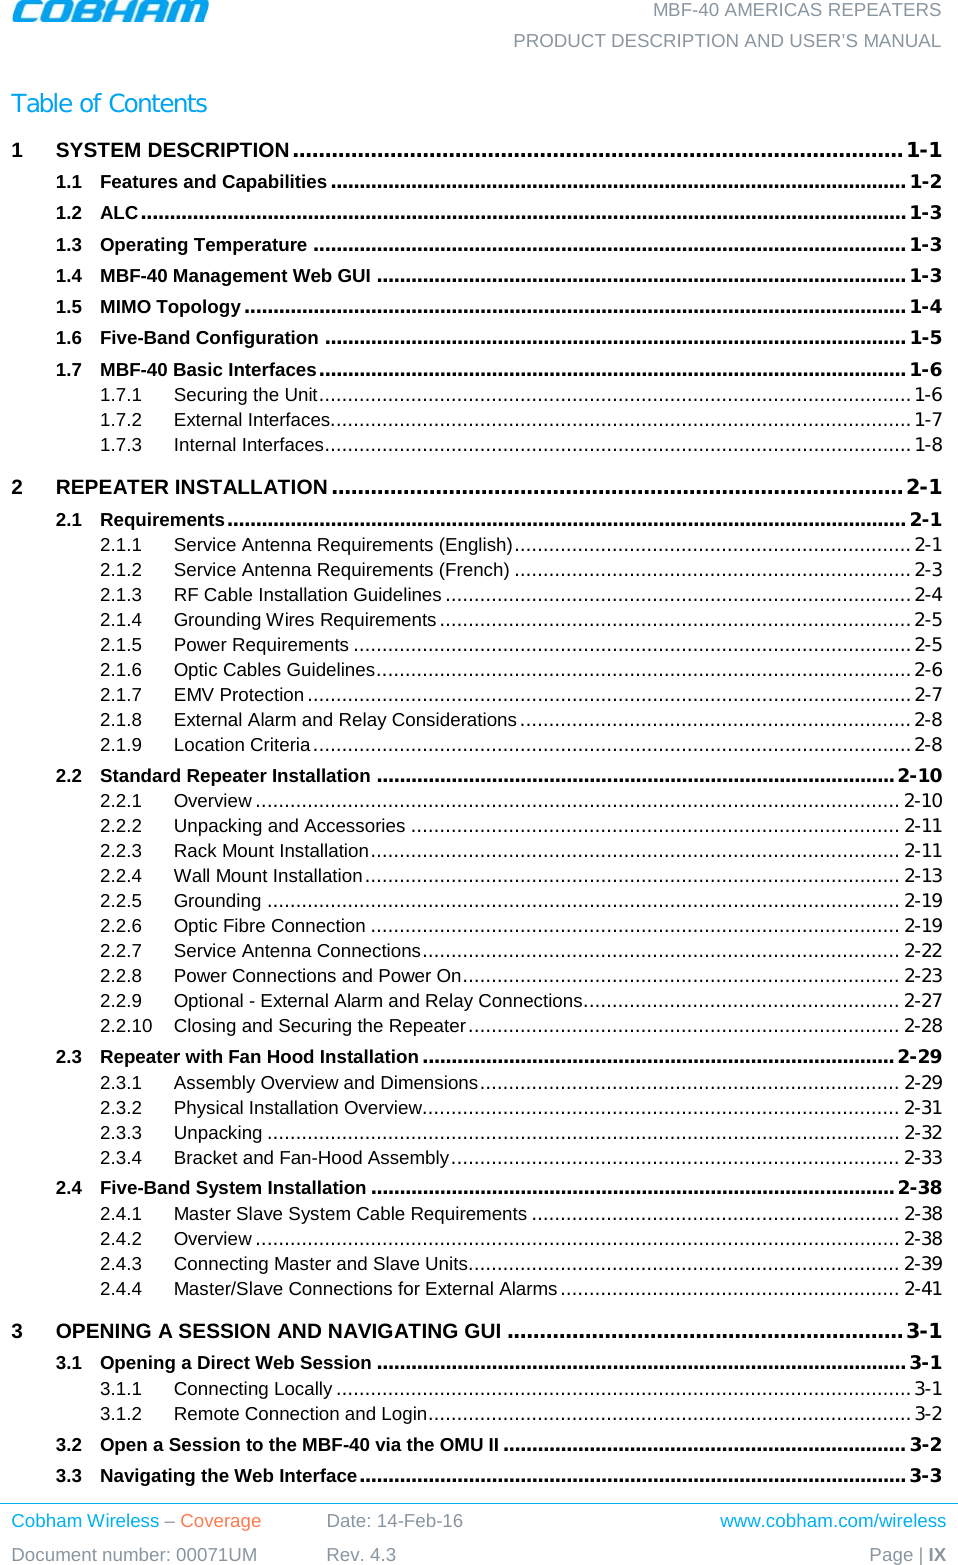  MBF-40 AMERICAS REPEATERS PRODUCT DESCRIPTION AND USER’S MANUAL Cobham Wireless – Coverage Date: 14-Feb-16 www.cobham.com/wireless Document number: 00071UM Rev. 4.3 Page | IX  Table of Contents 1 SYSTEM DESCRIPTION .............................................................................................. 1-1 1.1 Features and Capabilities .................................................................................................... 1-2 1.2 ALC ..................................................................................................................................... 1-3 1.3 Operating Temperature ....................................................................................................... 1-3 1.4 MBF-40 Management Web GUI ............................................................................................ 1-3 1.5 MIMO Topology ................................................................................................................... 1-4 1.6 Five-Band Configuration ..................................................................................................... 1-5 1.7 MBF-40 Basic Interfaces ...................................................................................................... 1-6 1.7.1 Securing the Unit ....................................................................................................... 1-6 1.7.2 External Interfaces..................................................................................................... 1-7 1.7.3 Internal Interfaces ...................................................................................................... 1-8 2 REPEATER INSTALLATION ........................................................................................ 2-1 2.1 Requirements ...................................................................................................................... 2-1 2.1.1 Service Antenna Requirements (English) ..................................................................... 2-1 2.1.2 Service Antenna Requirements (French) ..................................................................... 2-3 2.1.3 RF Cable Installation Guidelines ................................................................................. 2-4 2.1.4 Grounding Wires Requirements .................................................................................. 2-5 2.1.5 Power Requirements ................................................................................................. 2-5 2.1.6 Optic Cables Guidelines ............................................................................................. 2-6 2.1.7 EMV Protection ......................................................................................................... 2-7 2.1.8 External Alarm and Relay Considerations .................................................................... 2-8 2.1.9 Location Criteria ........................................................................................................ 2-8 2.2 Standard Repeater Installation .......................................................................................... 2-10 2.2.1 Overview ................................................................................................................ 2-10 2.2.2 Unpacking and Accessories ..................................................................................... 2-11 2.2.3 Rack Mount Installation ............................................................................................ 2-11 2.2.4 Wall Mount Installation ............................................................................................. 2-13 2.2.5 Grounding .............................................................................................................. 2-19 2.2.6 Optic Fibre Connection ............................................................................................ 2-19 2.2.7 Service Antenna Connections ................................................................................... 2-22 2.2.8 Power Connections and Power On ............................................................................ 2-23 2.2.9 Optional - External Alarm and Relay Connections ....................................................... 2-27 2.2.10 Closing and Securing the Repeater ........................................................................... 2-28 2.3 Repeater with Fan Hood Installation .................................................................................. 2-29 2.3.1 Assembly Overview and Dimensions ......................................................................... 2-29 2.3.2 Physical Installation Overview ................................................................................... 2-31 2.3.3 Unpacking .............................................................................................................. 2-32 2.3.4 Bracket and Fan-Hood Assembly .............................................................................. 2-33 2.4 Five-Band System Installation ........................................................................................... 2-38 2.4.1 Master Slave System Cable Requirements ................................................................ 2-38 2.4.2 Overview ................................................................................................................ 2-38 2.4.3 Connecting Master and Slave Units ........................................................................... 2-39 2.4.4 Master/Slave Connections for External Alarms ........................................................... 2-41 3 OPENING A SESSION AND NAVIGATING GUI ............................................................. 3-1 3.1 Opening a Direct Web Session ............................................................................................ 3-1 3.1.1 Connecting Locally .................................................................................................... 3-1 3.1.2 Remote Connection and Login .................................................................................... 3-2 3.2 Open a Session to the MBF-40 via the OMU II ...................................................................... 3-2 3.3 Navigating the Web Interface ............................................................................................... 3-3 